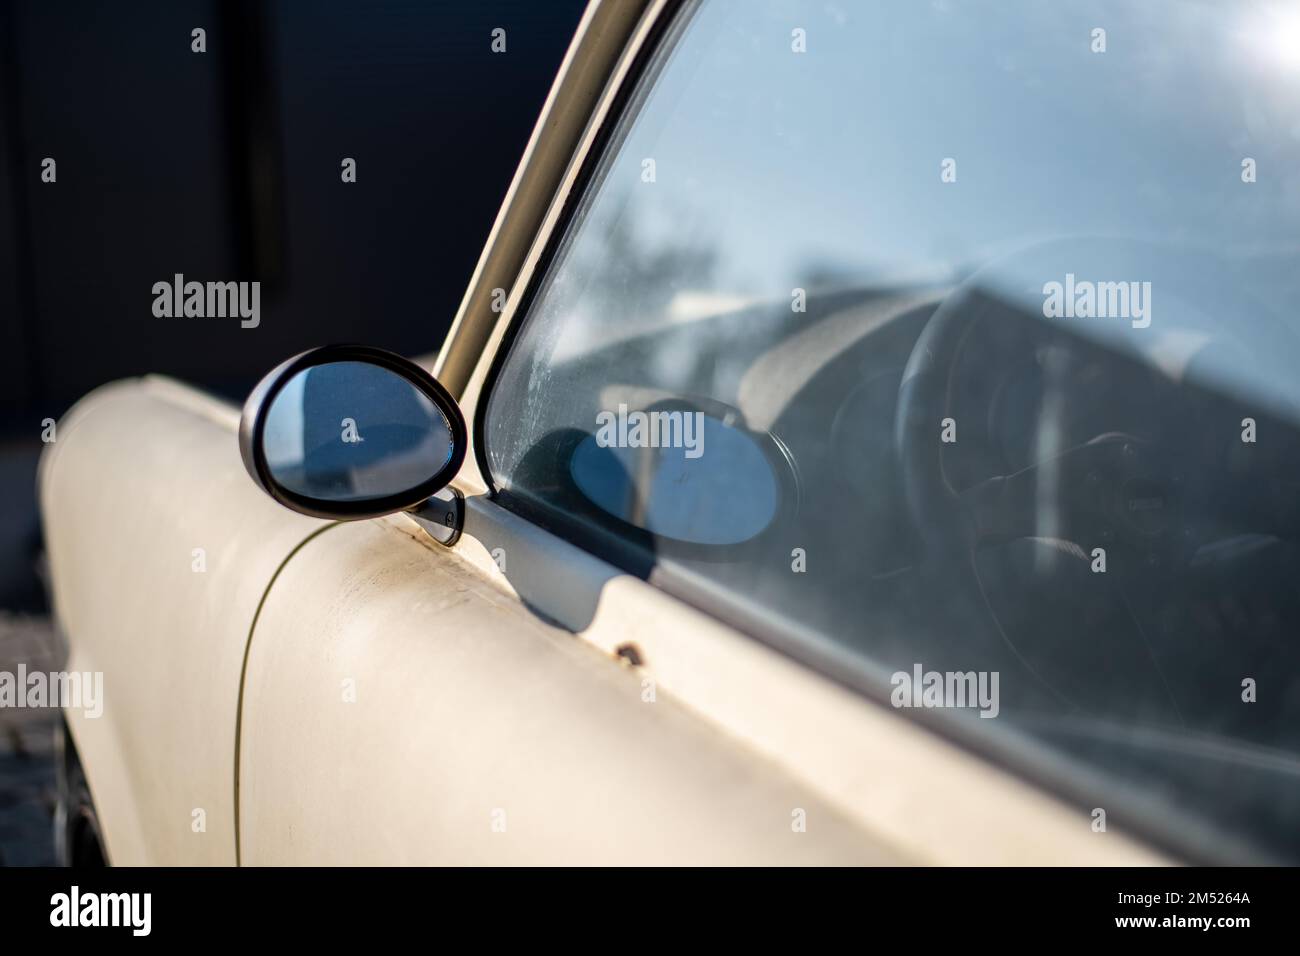 Legendary Trabant Car.Left on side-view mirror of a Trabant car. Stock Photo